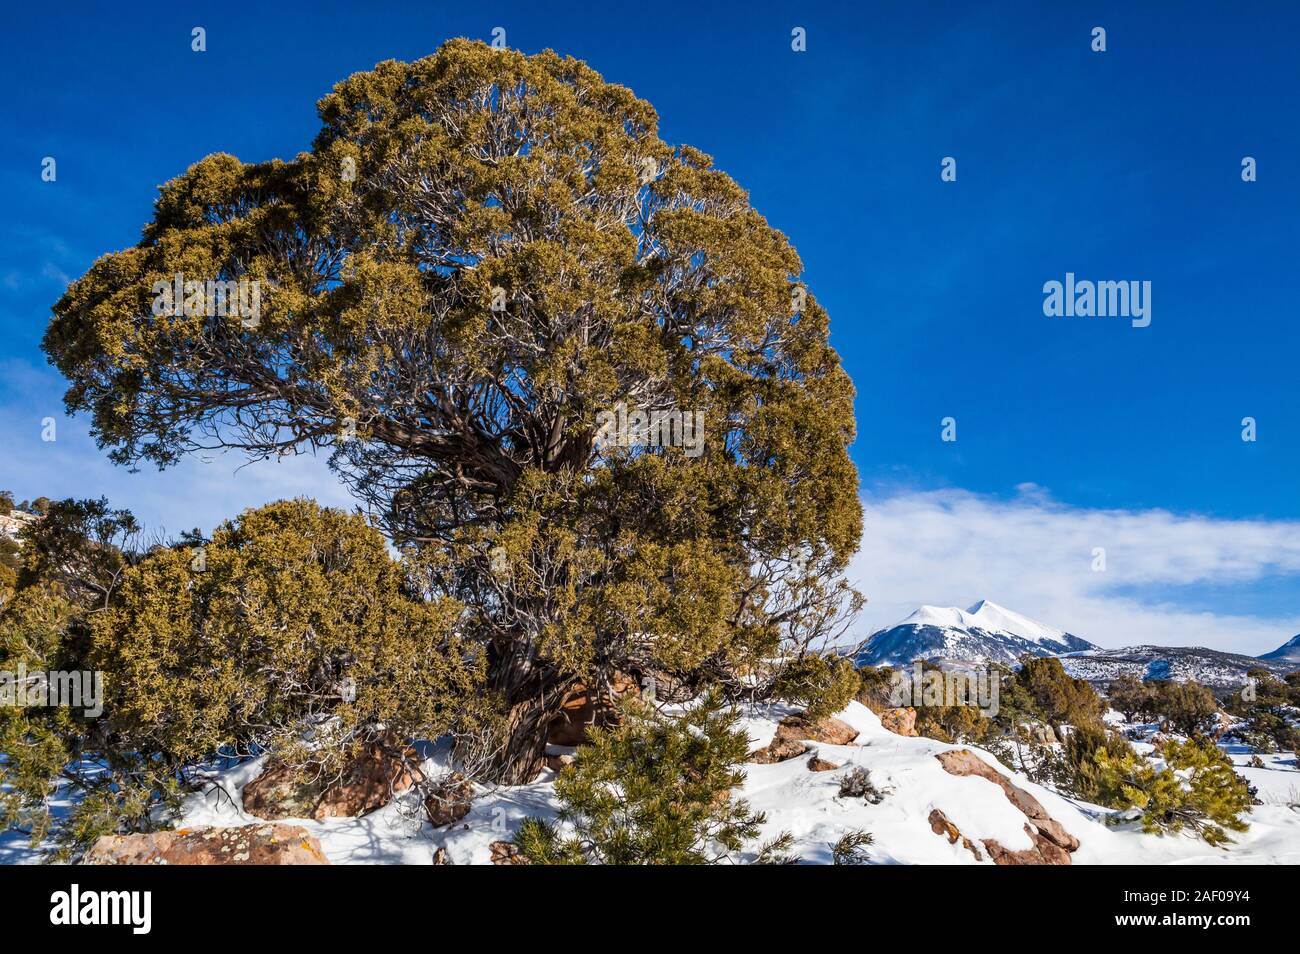 Looking upward toward the La Sal Mountains with a large Juniper tree in the foreground, southeast Utah, USA. Stock Photo